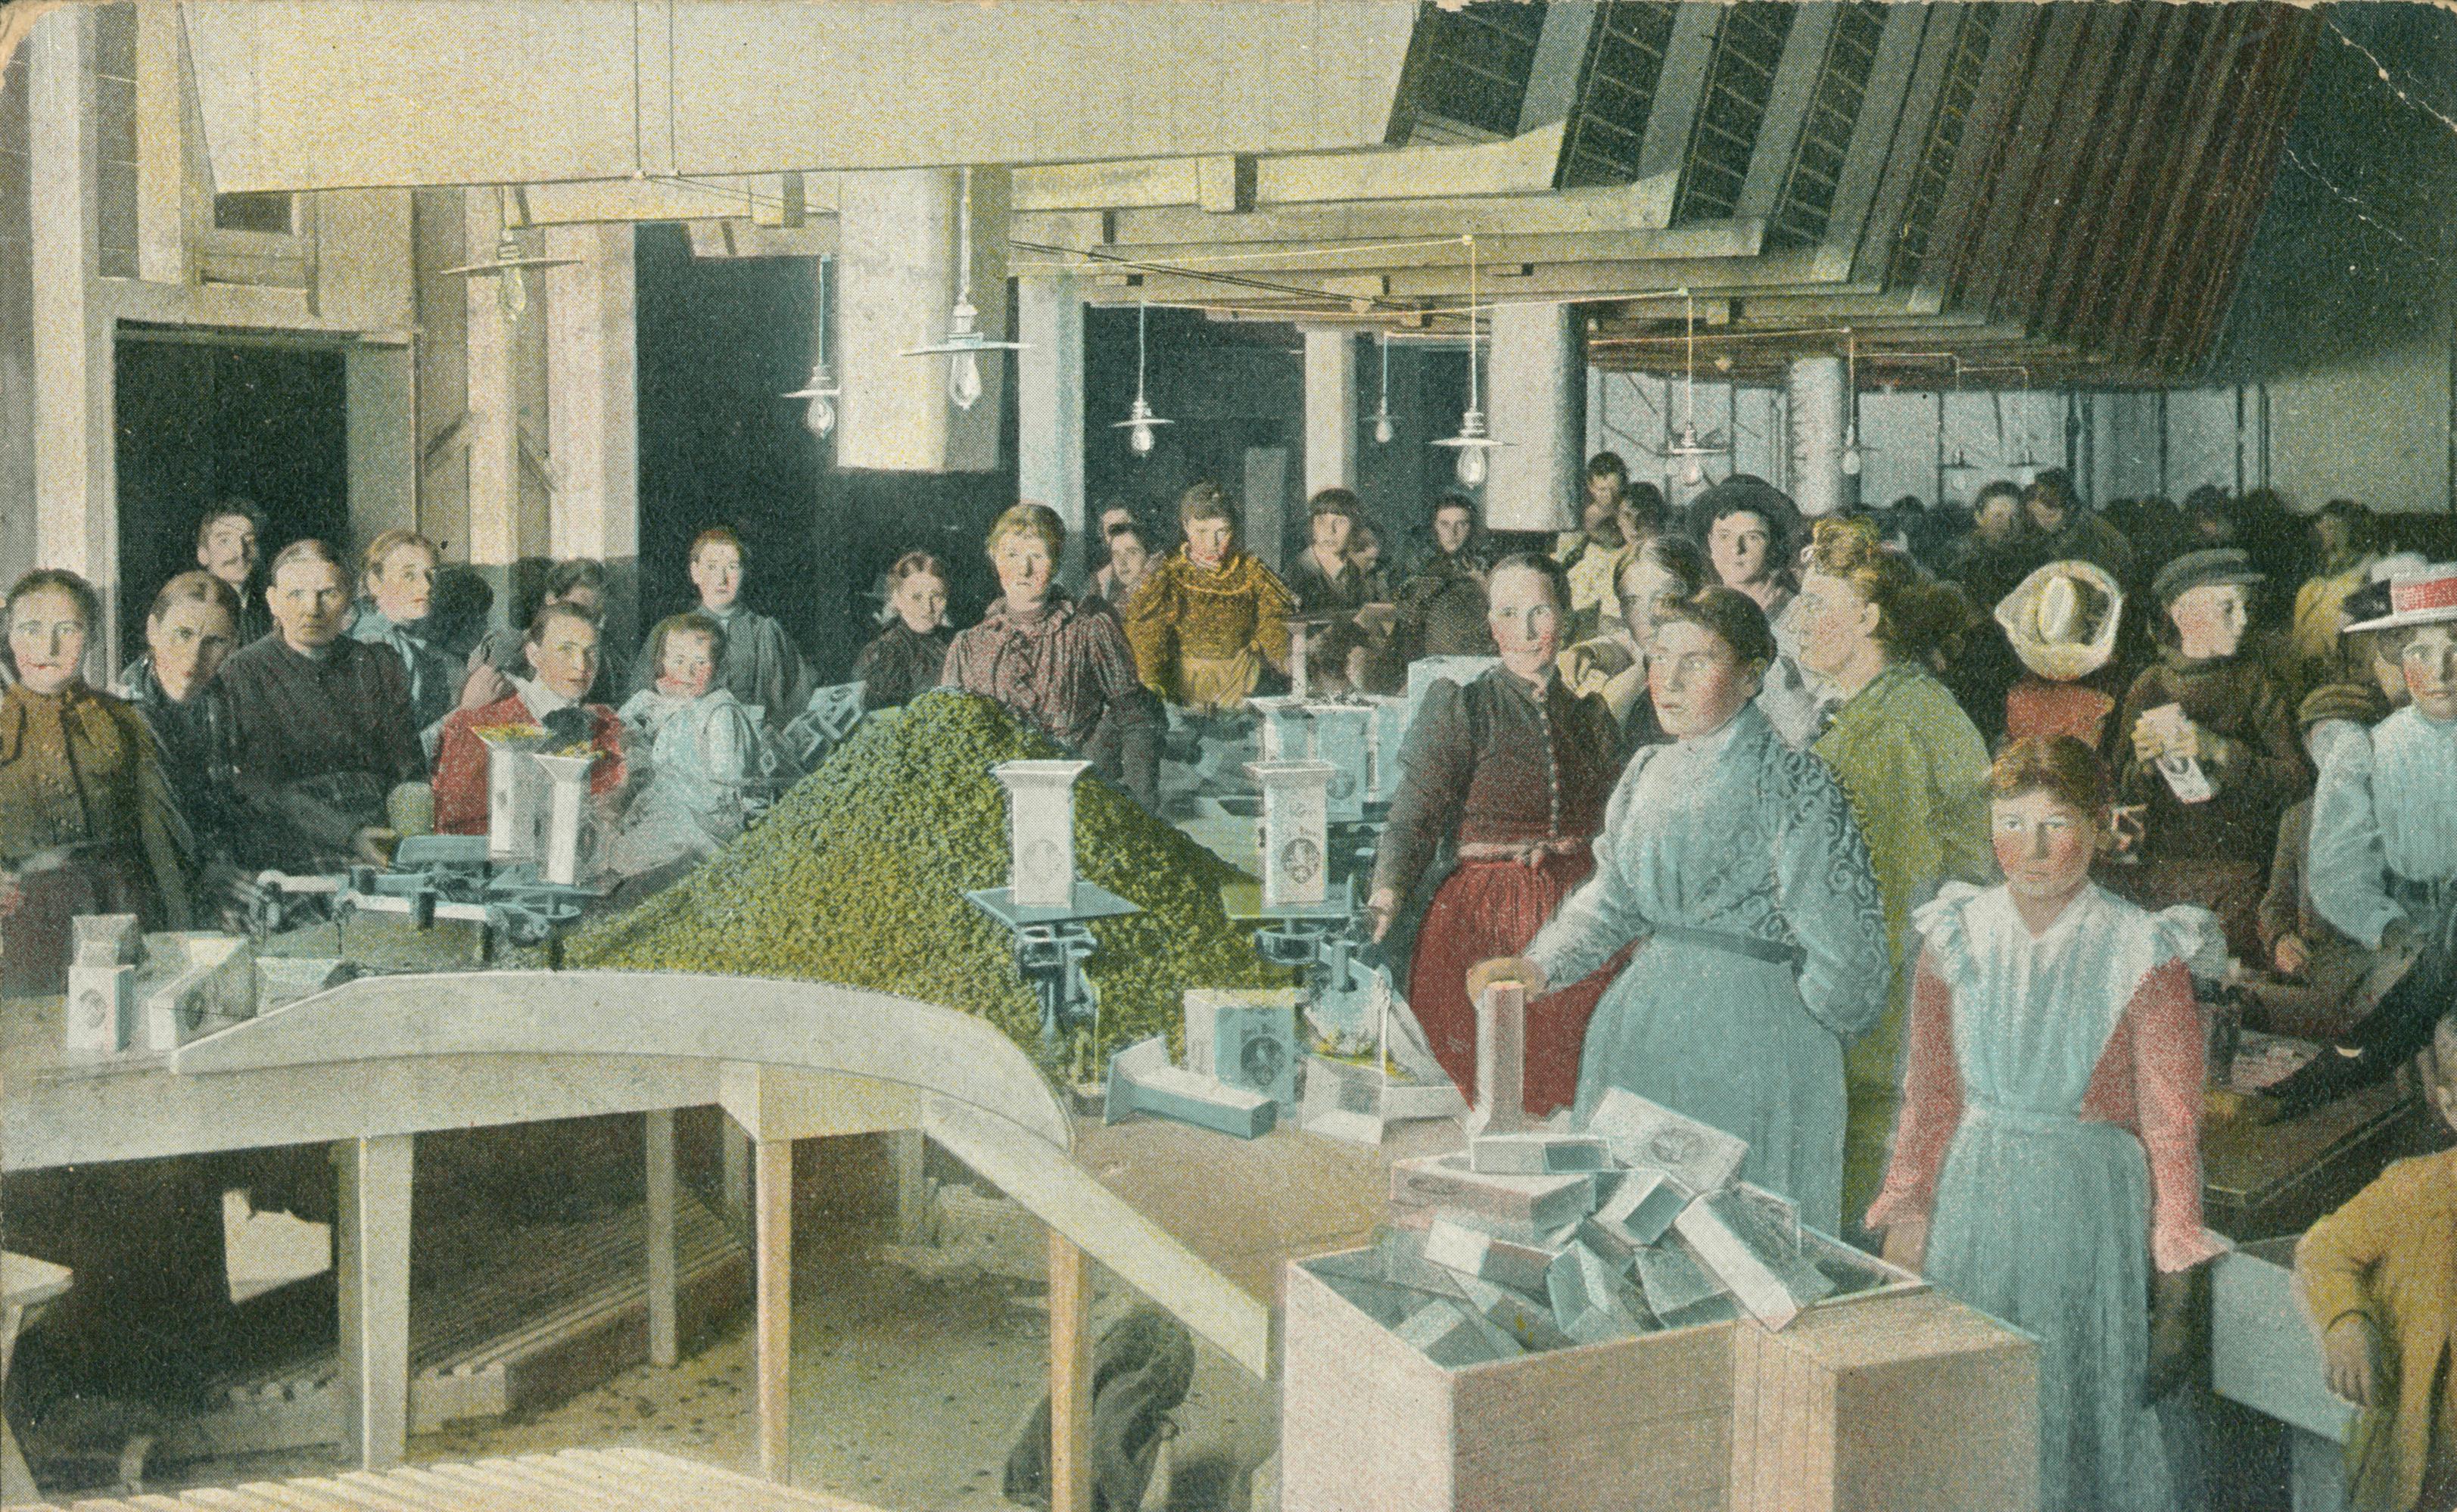 Shows the interior of a raisin packing house with workers looking at the viewer